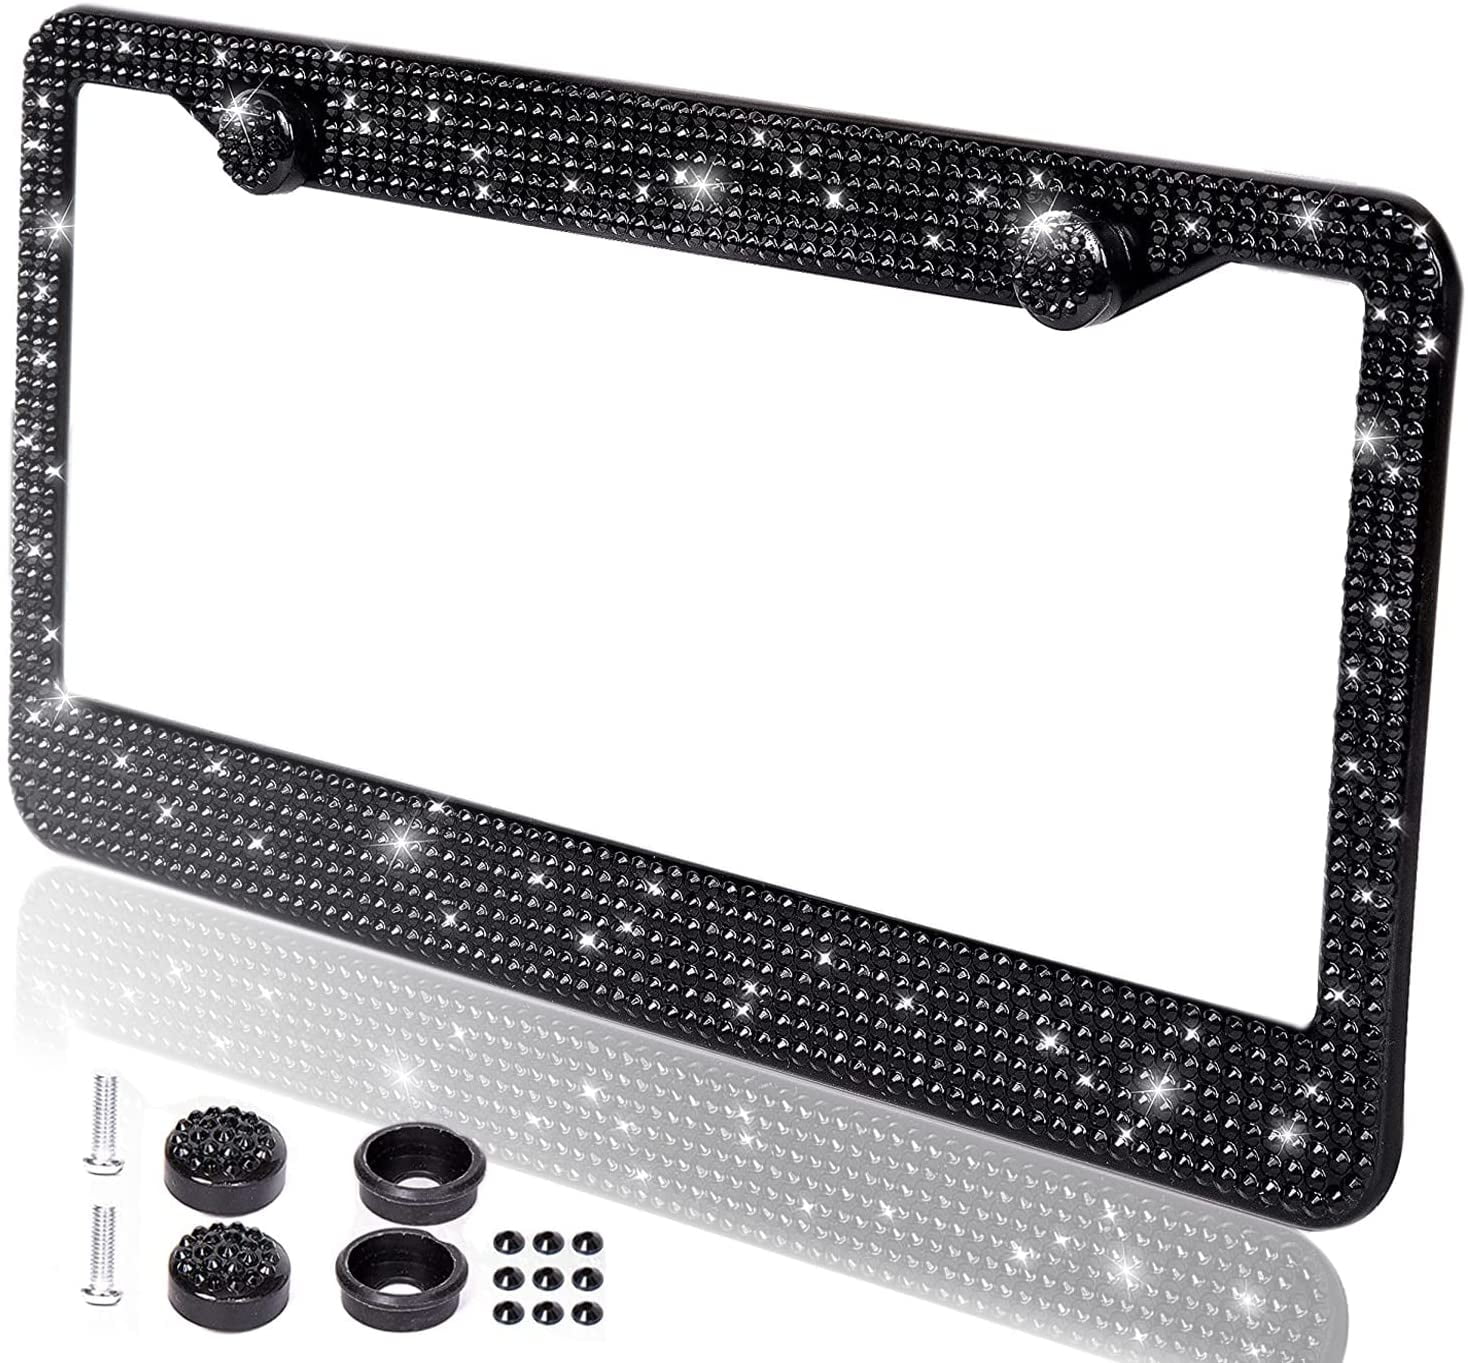 Zone Tech Shiny Bling License Plate Cover Frame Crystal Bling Premium Quality Novelty/License Plate Frame with Mounting Screws